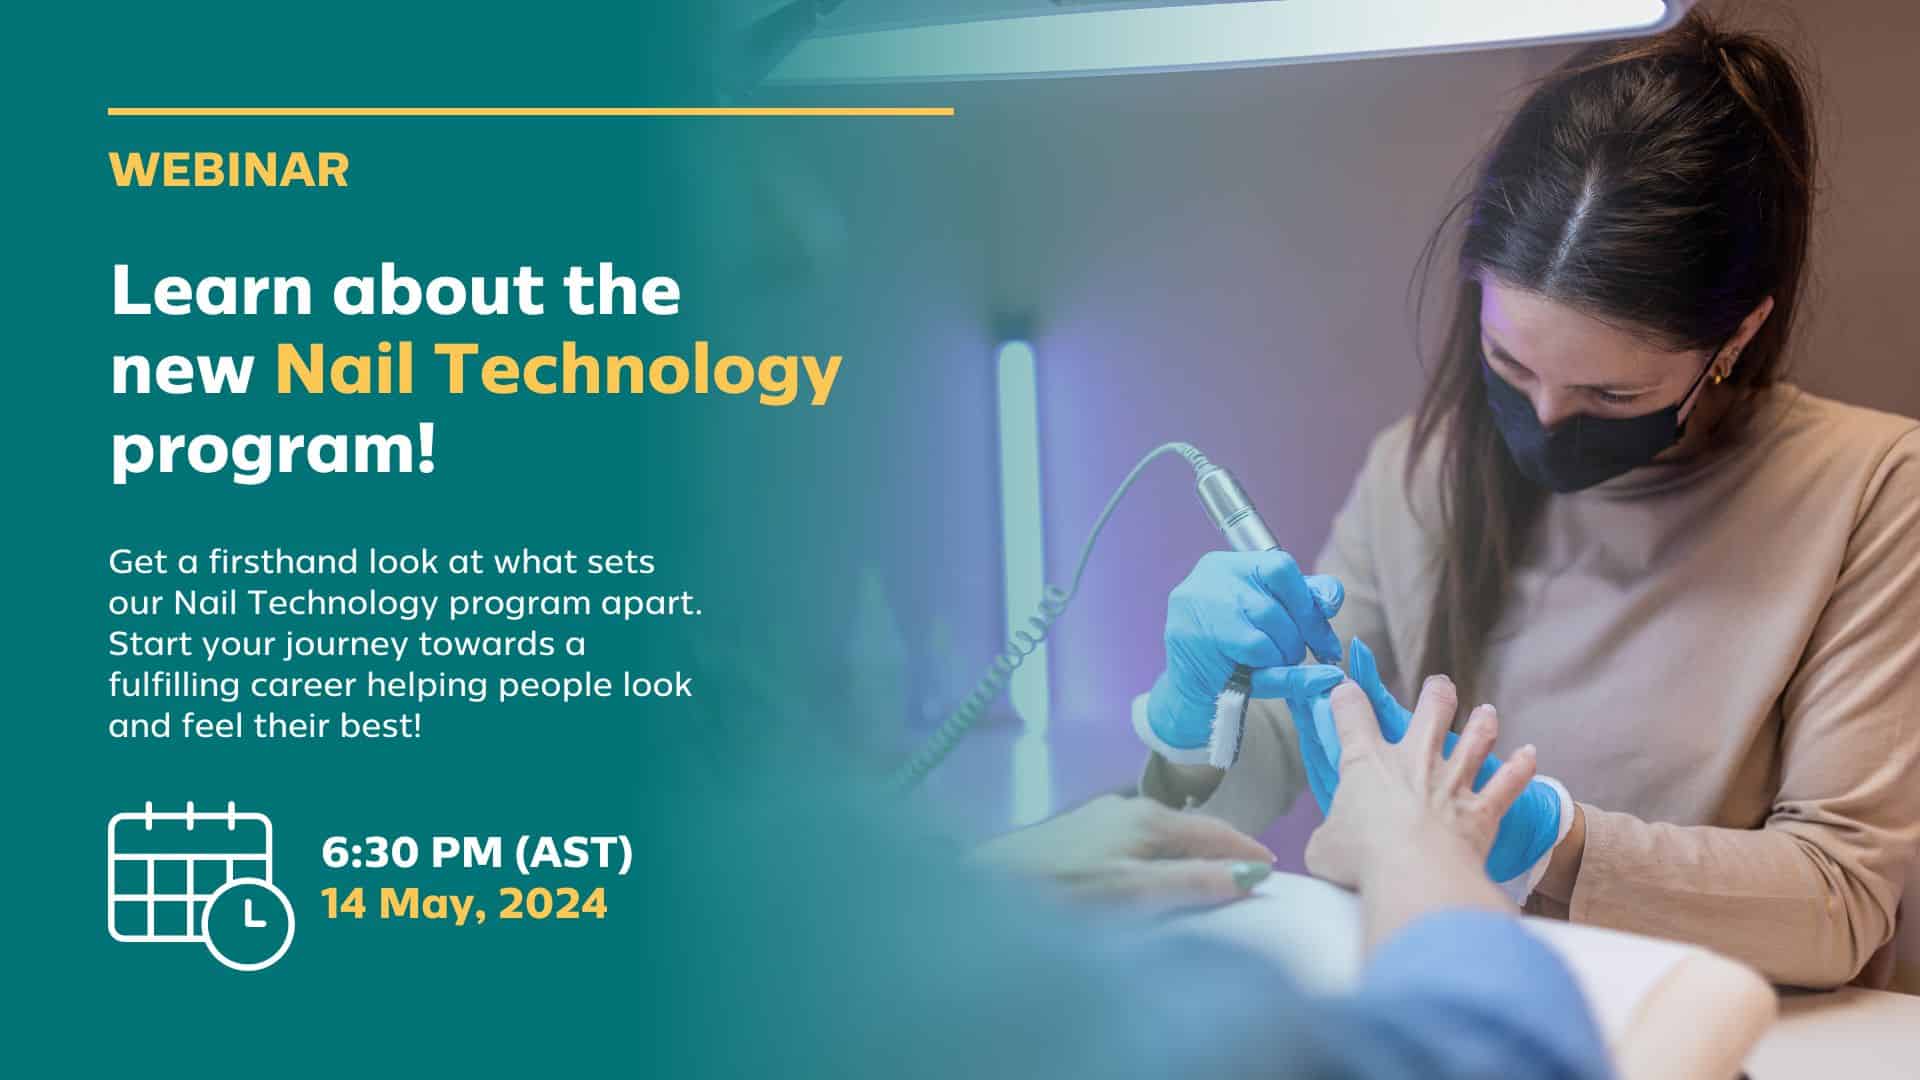 Featured image for https://www.cbbccareercollege.ca/upcoming-events/webinar-start-your-career-in-nail-technology/ event